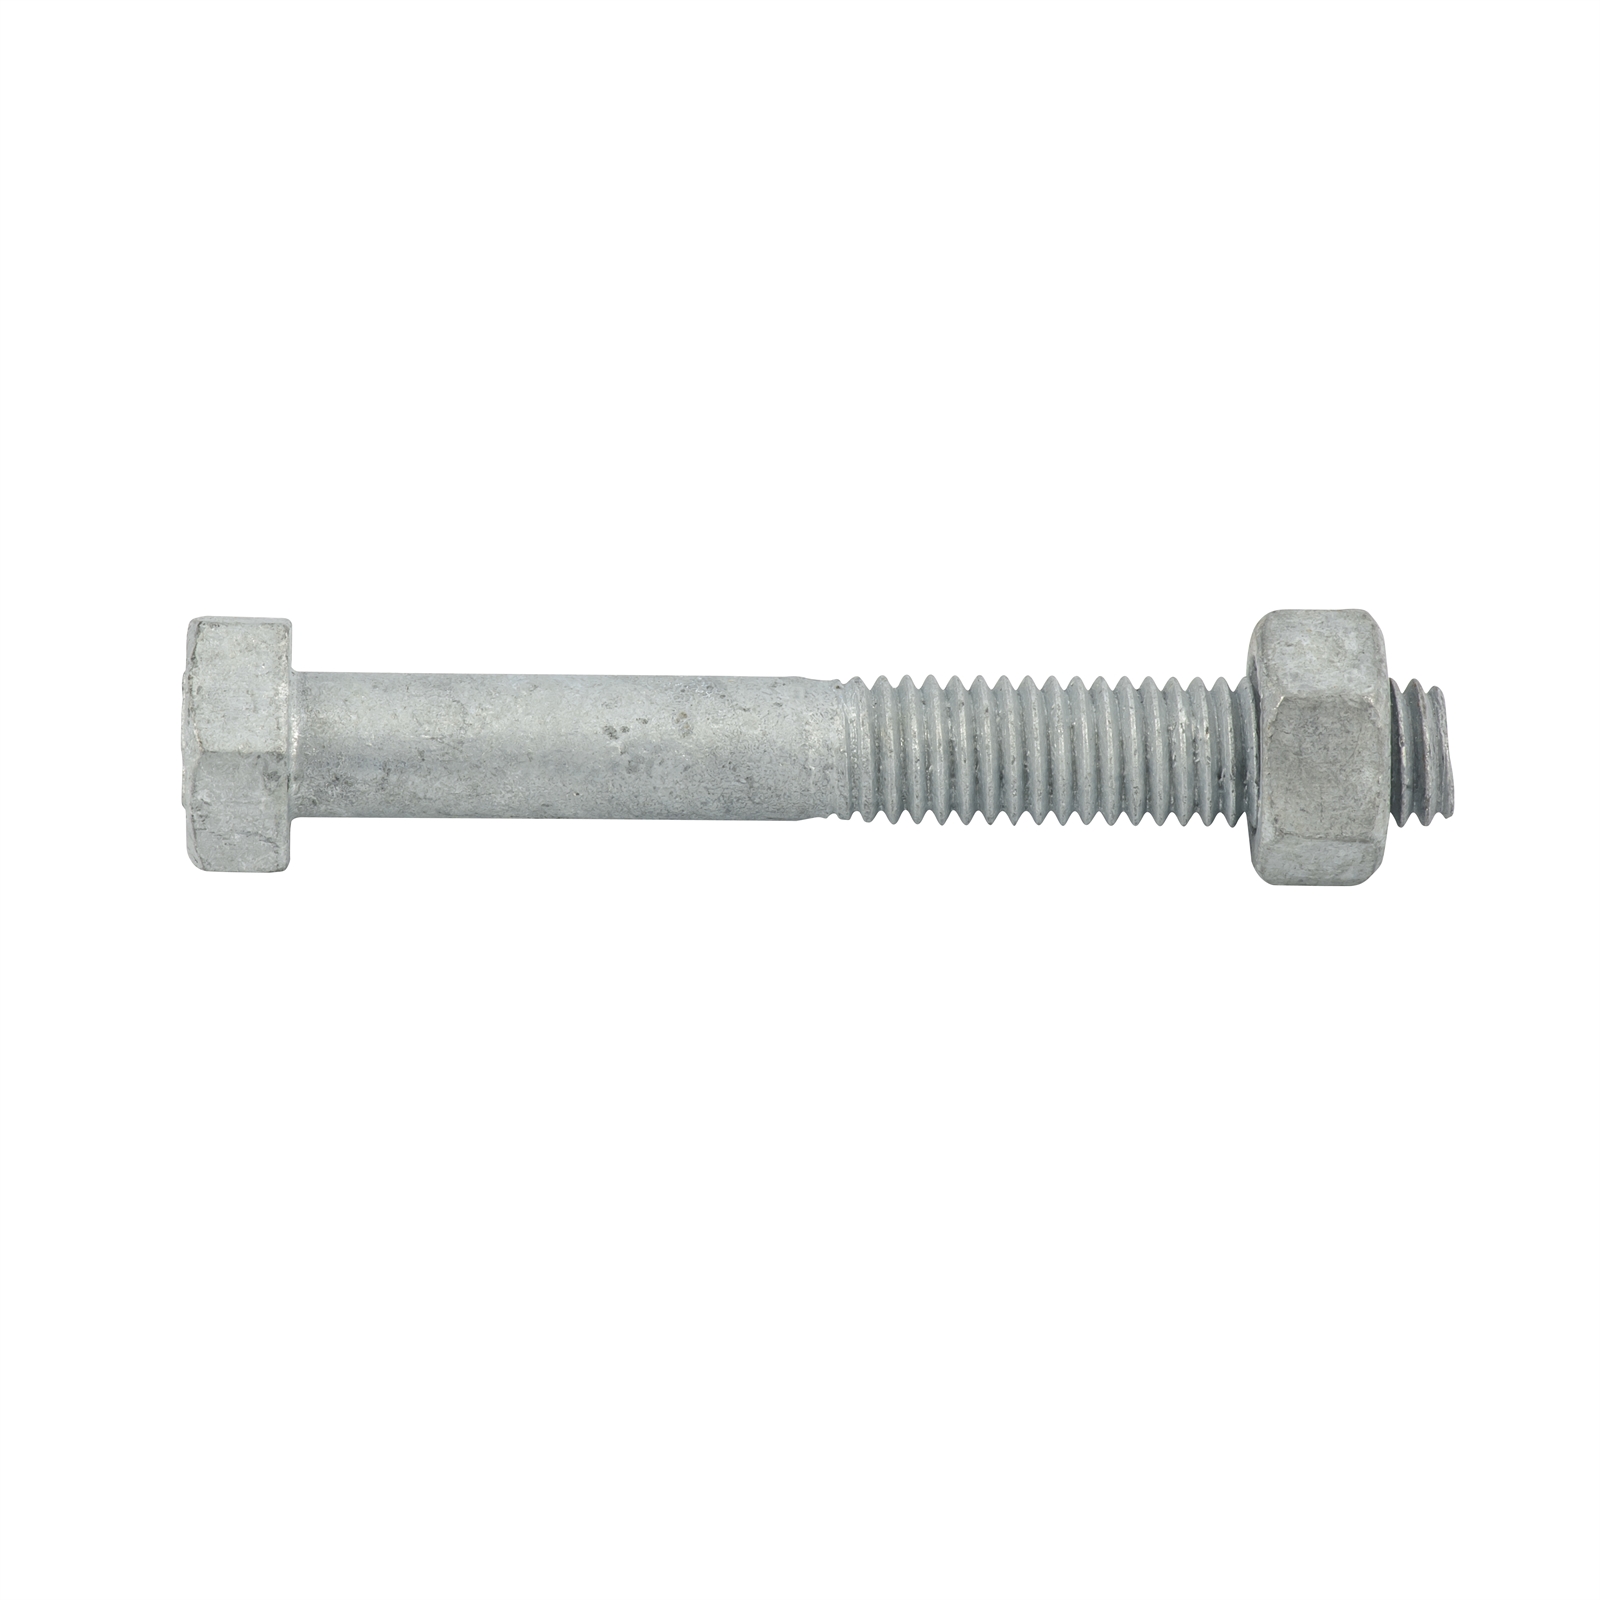 Zenith M8 x 60mm Galvanised Hex Head Bolt and Nut